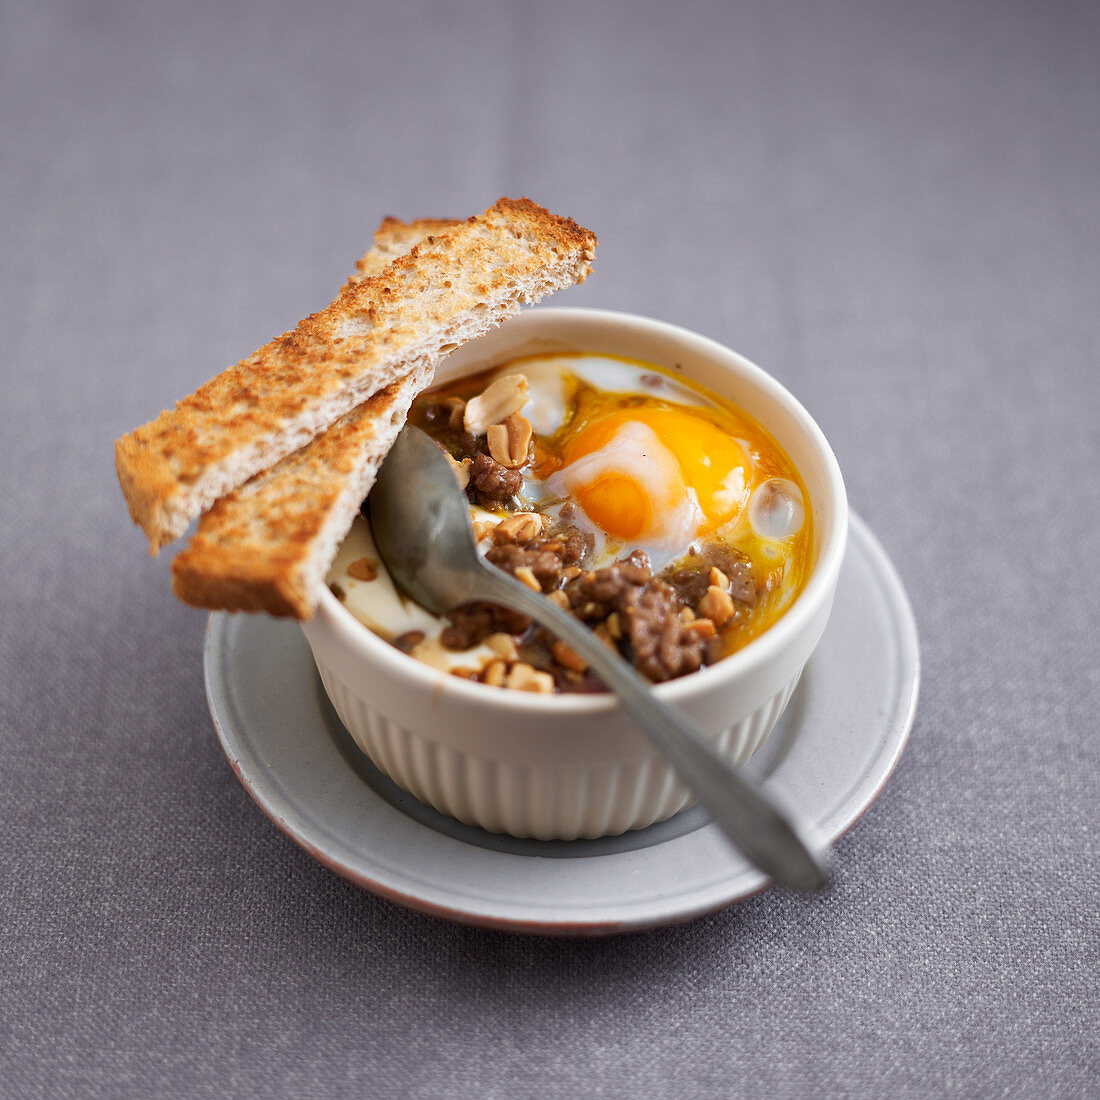 Shirred eggs with ground beef,peanuts and sweet and sour sauce